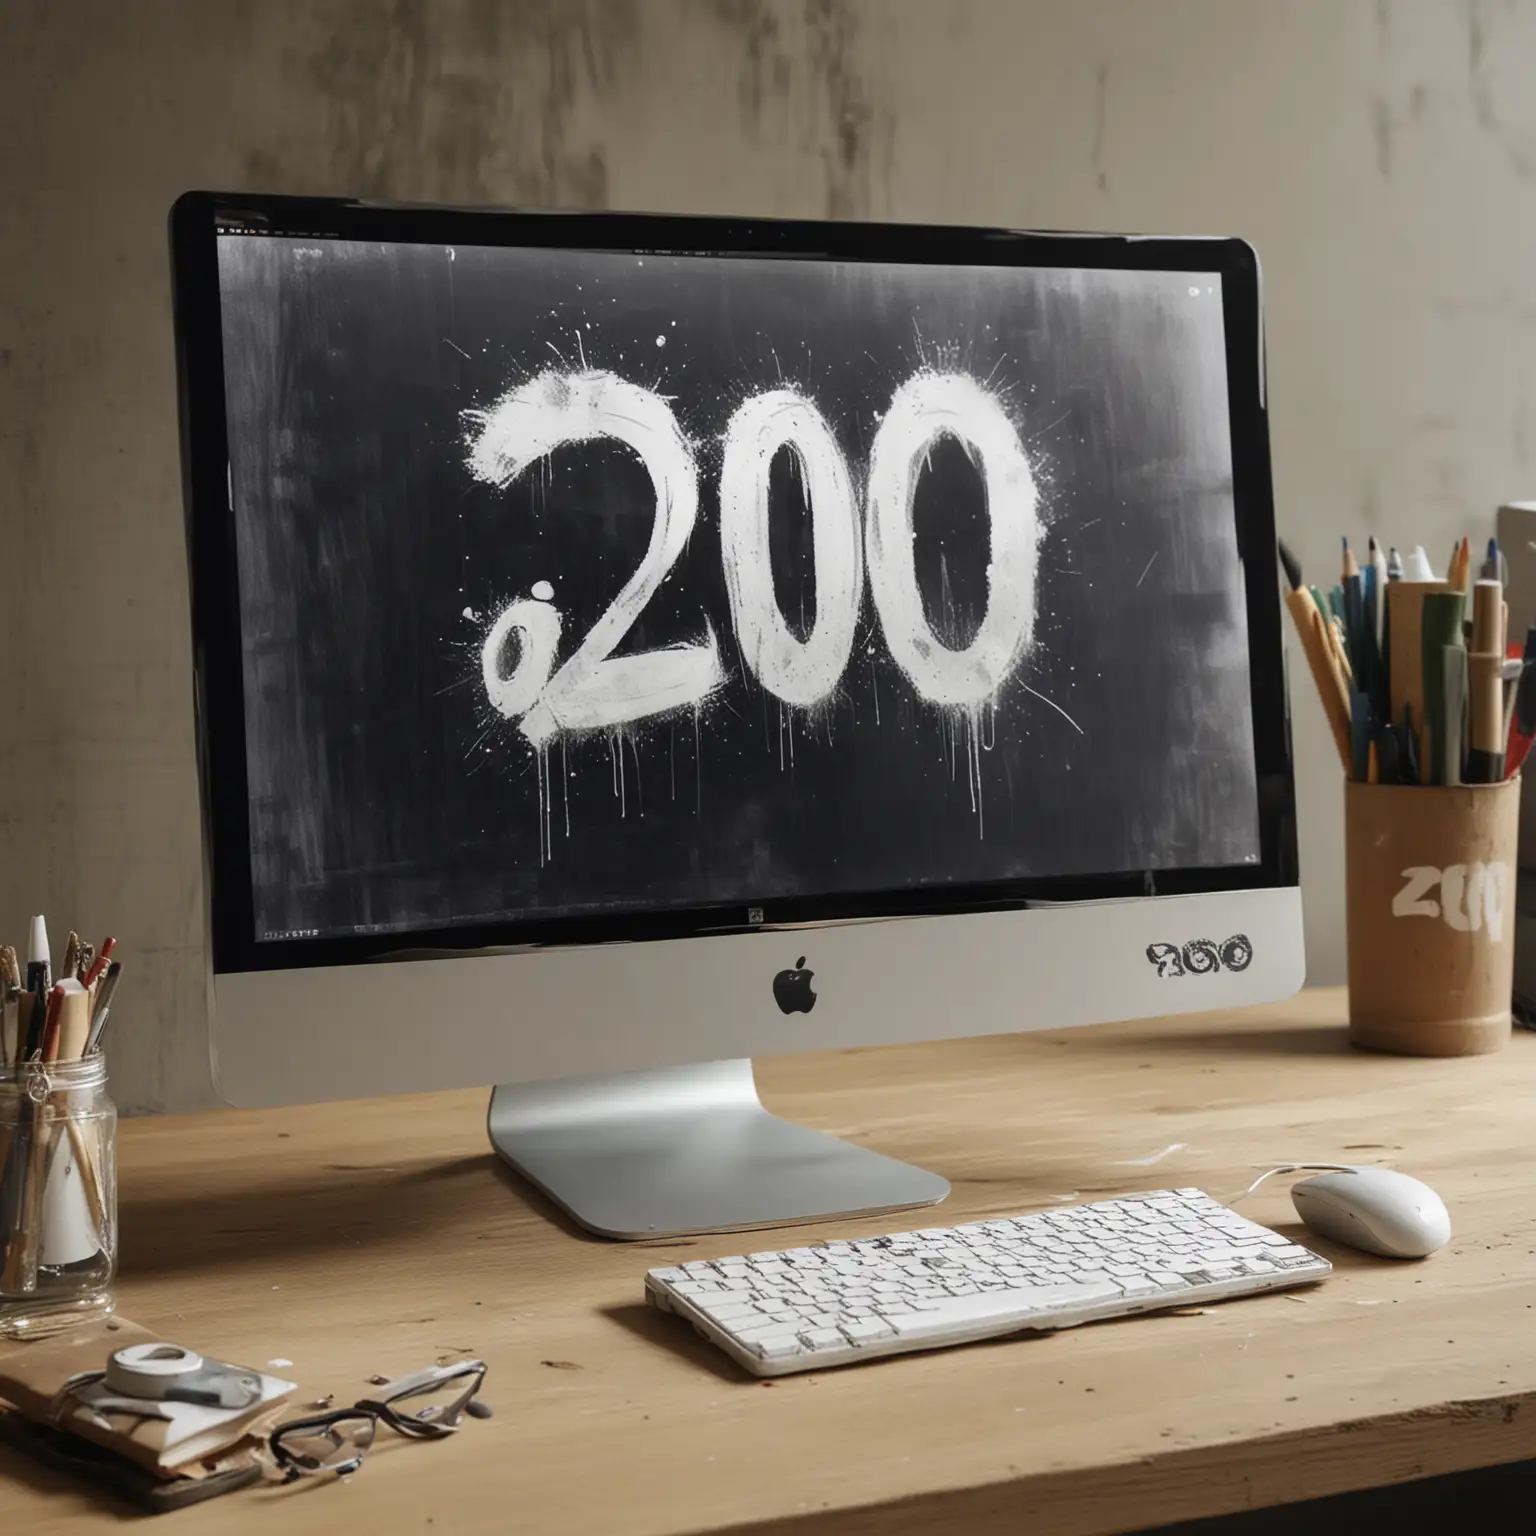 image of a designer's computer screen with "2000" spray painted on it, symbolizing the blend of creativity and excellence in every project.
